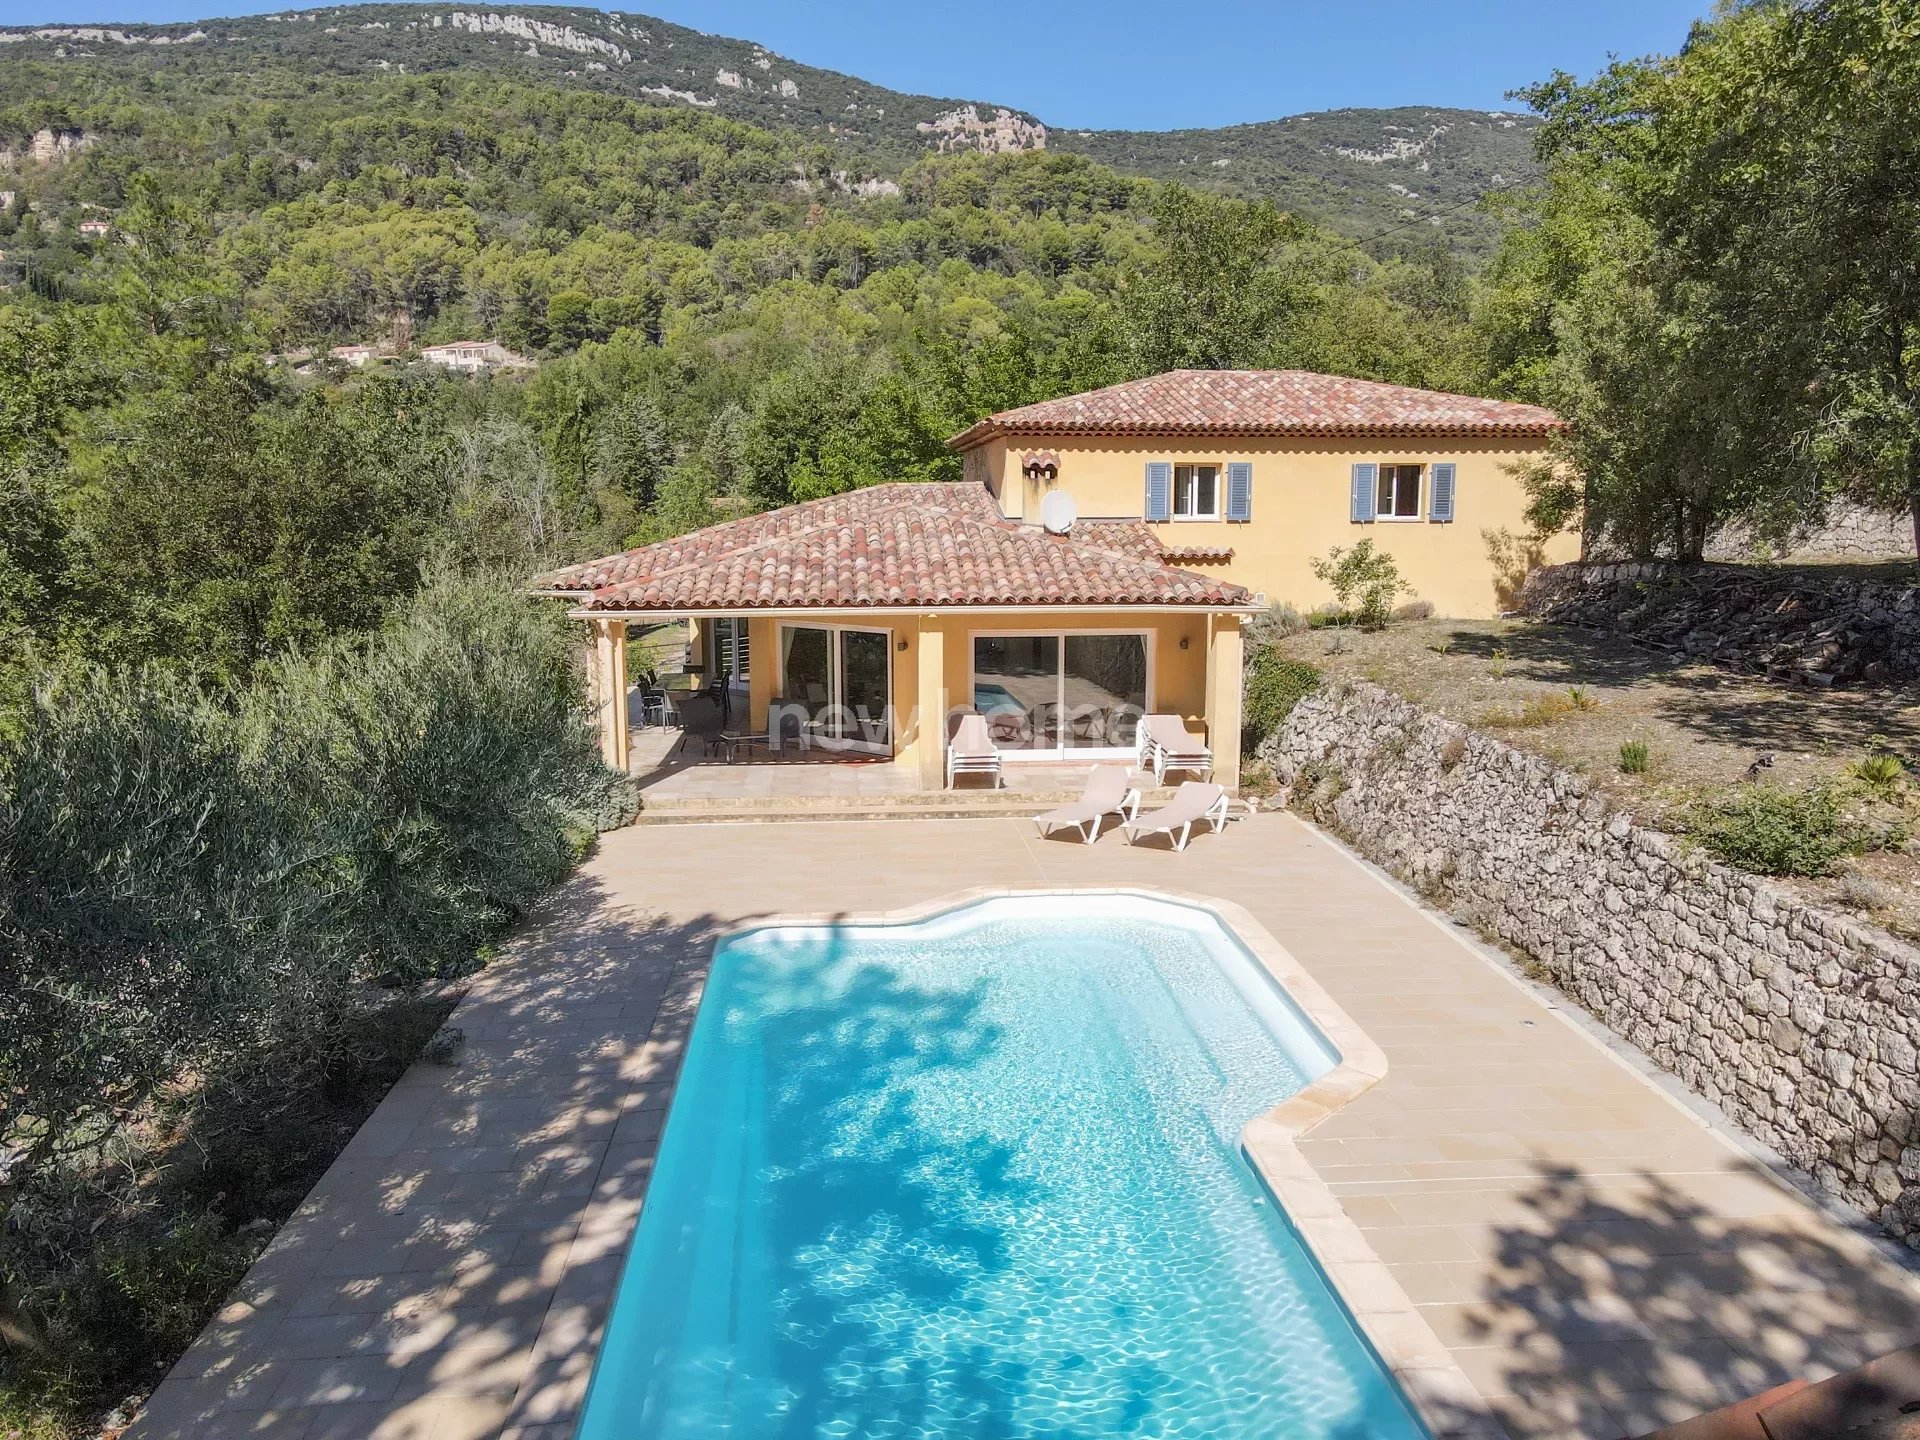 Spacious villa in good condition with heated swimming pool.